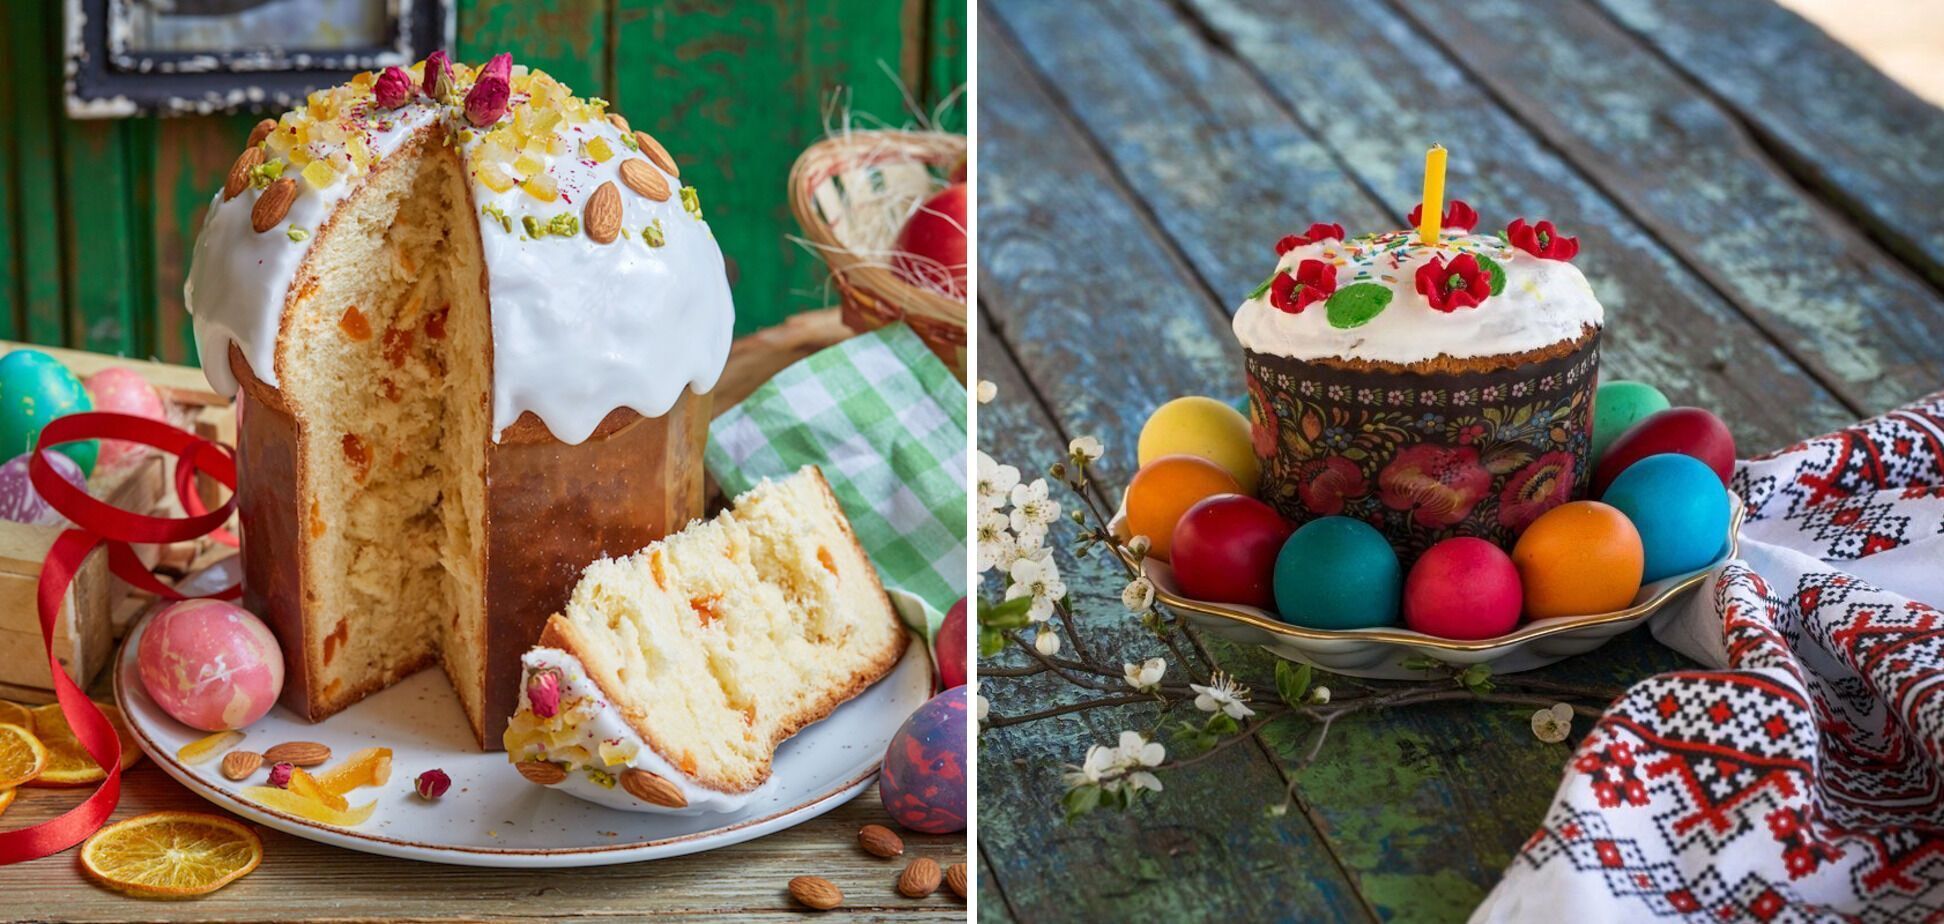 Easter cake and Easter eggs